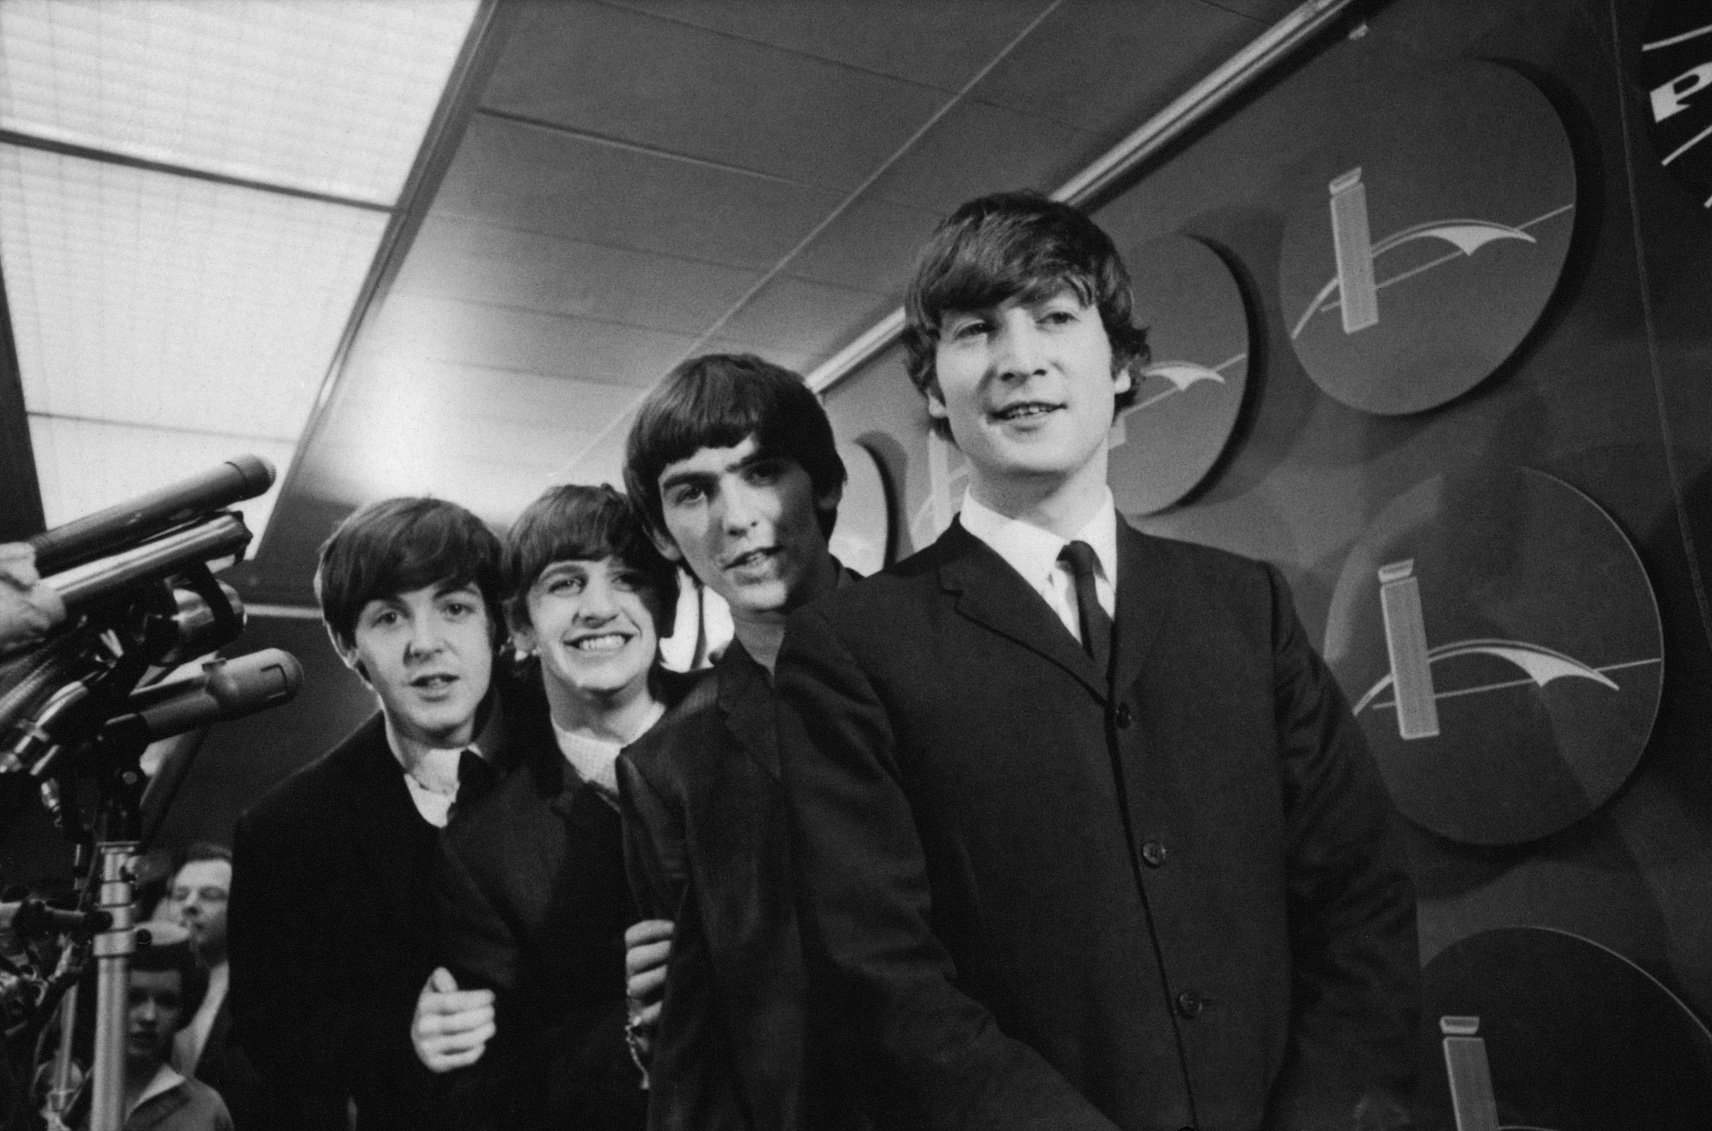 The Beatles arrive at John F. Kennedy International Airport in New York City